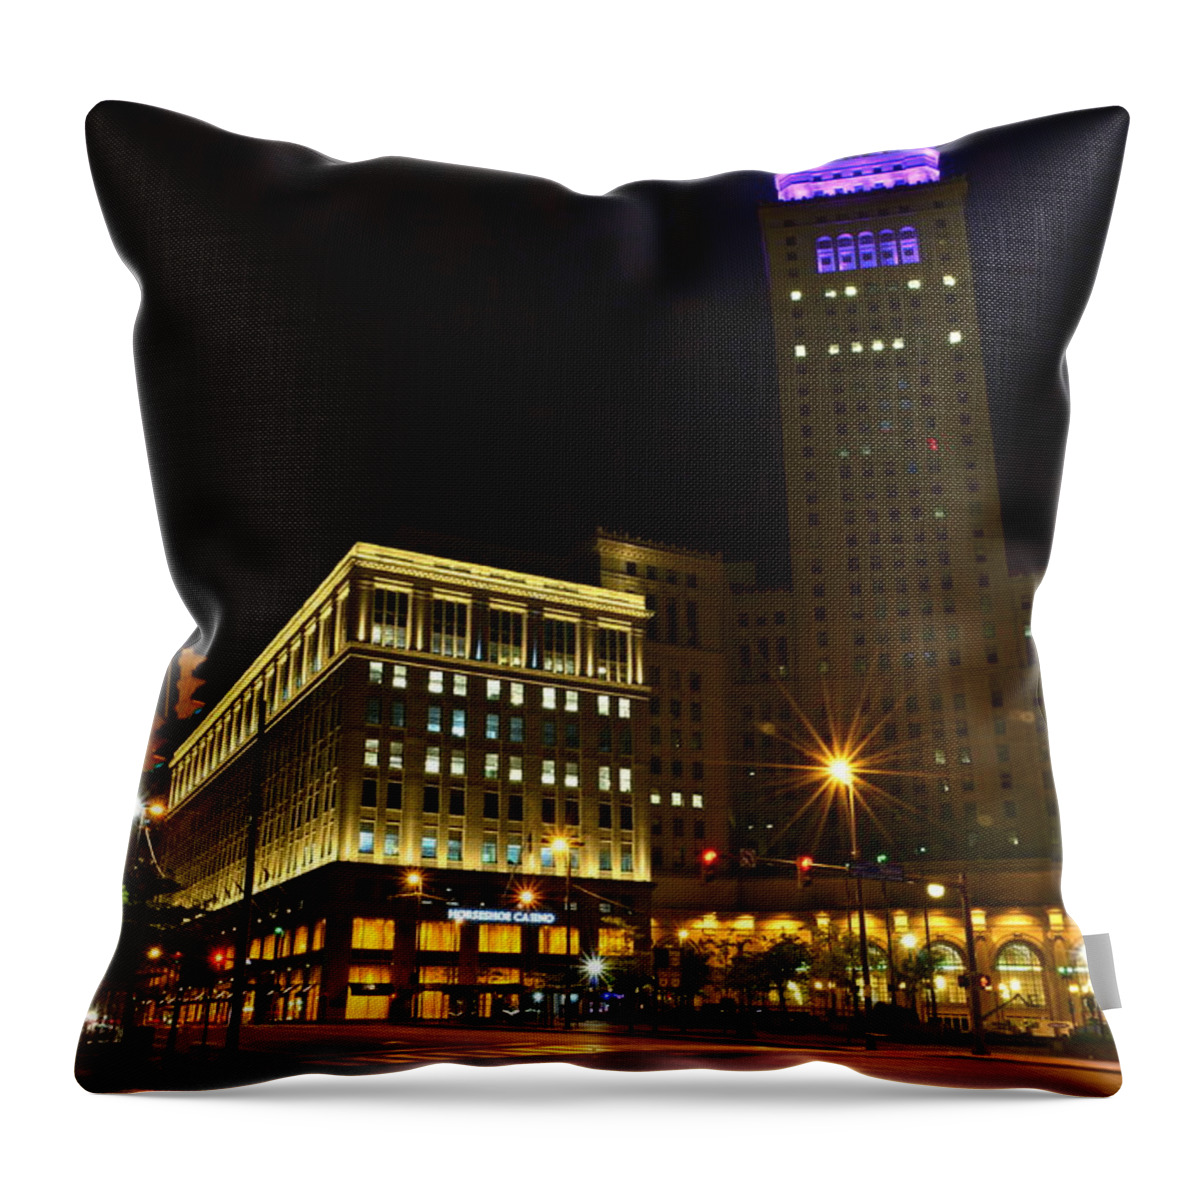 Casino Throw Pillow featuring the photograph Horseshoe Casino Cleveland by Frozen in Time Fine Art Photography